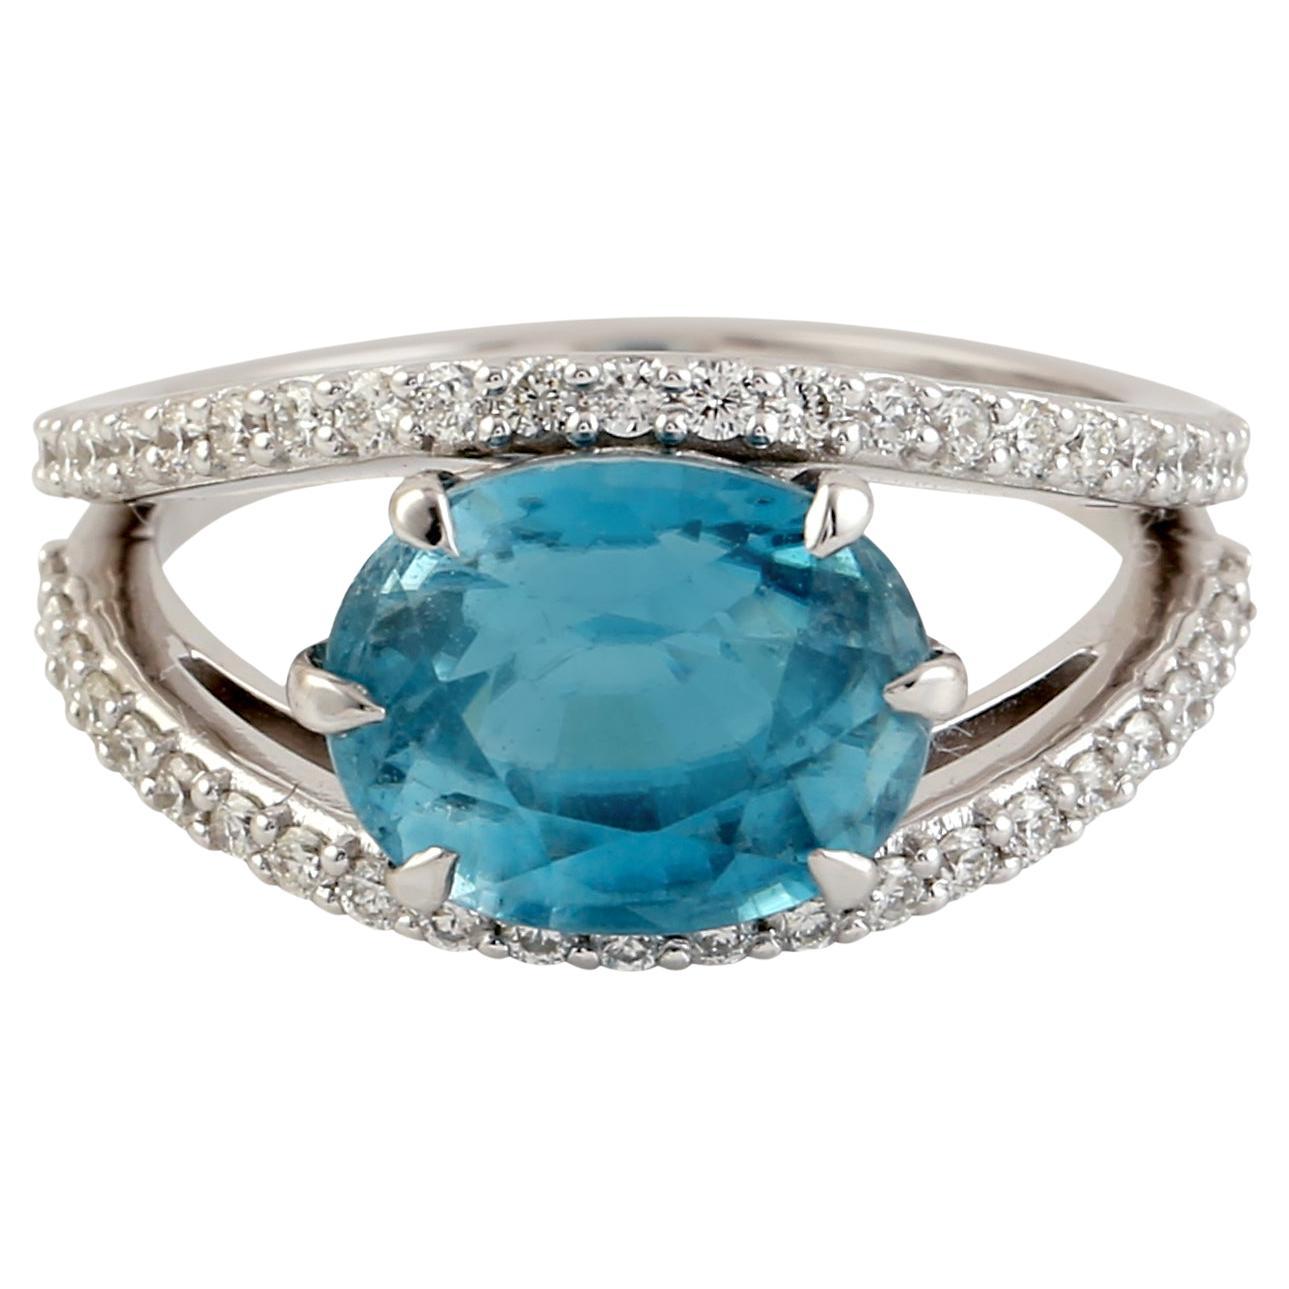 6.76ct Blue Zircon Ring With Diamonds Made In 18k Gold For Sale